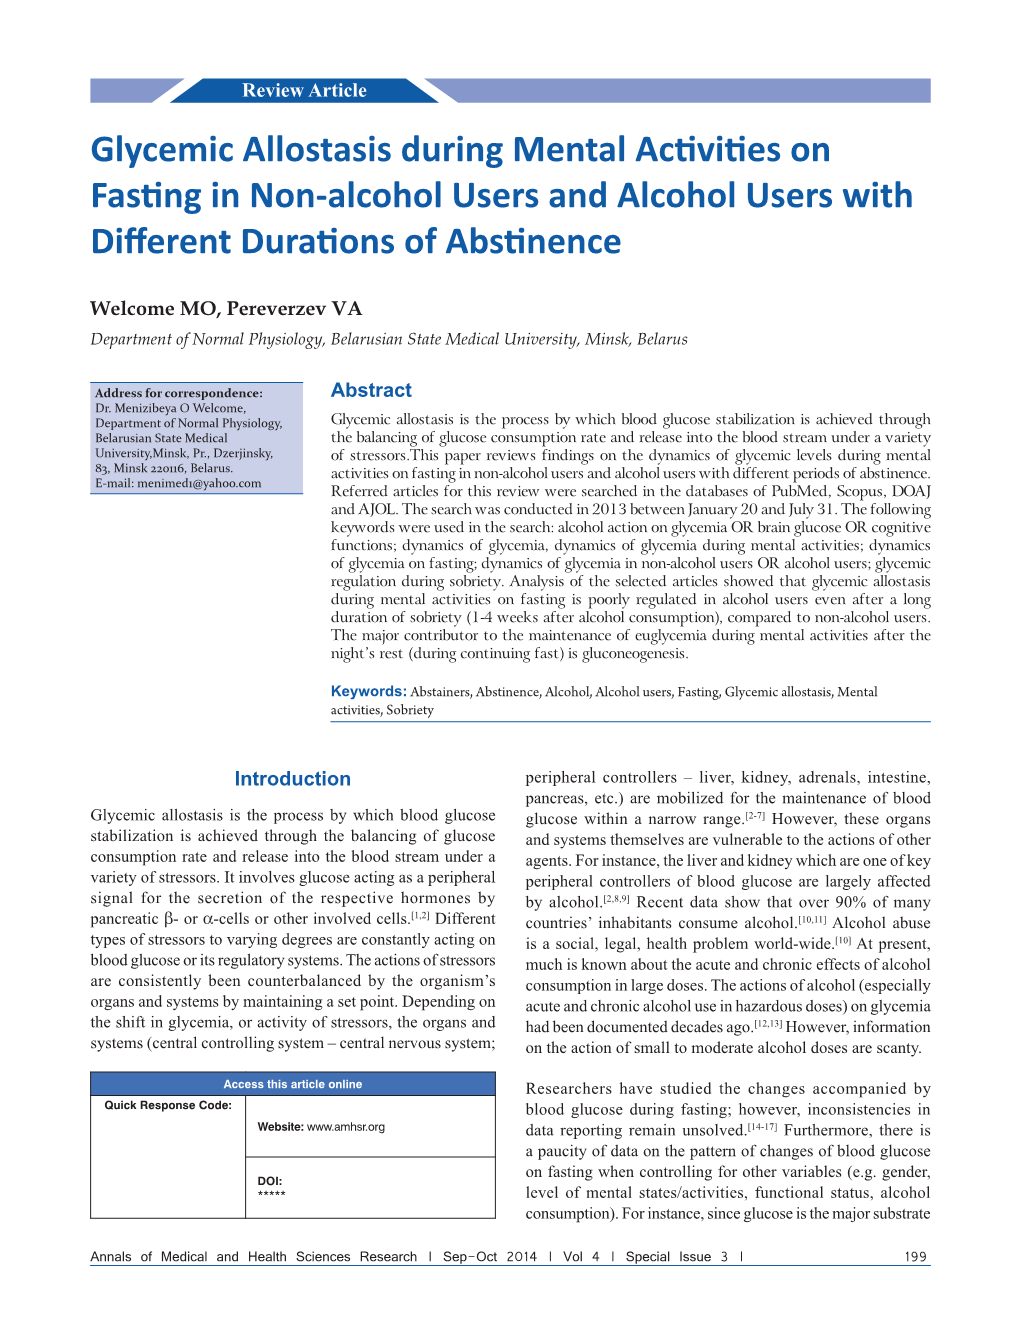 Glycemic Allostasis During Mental Activities on Fasting in Non‑Alcohol Users and Alcohol Users with Different Durations of Abstinence